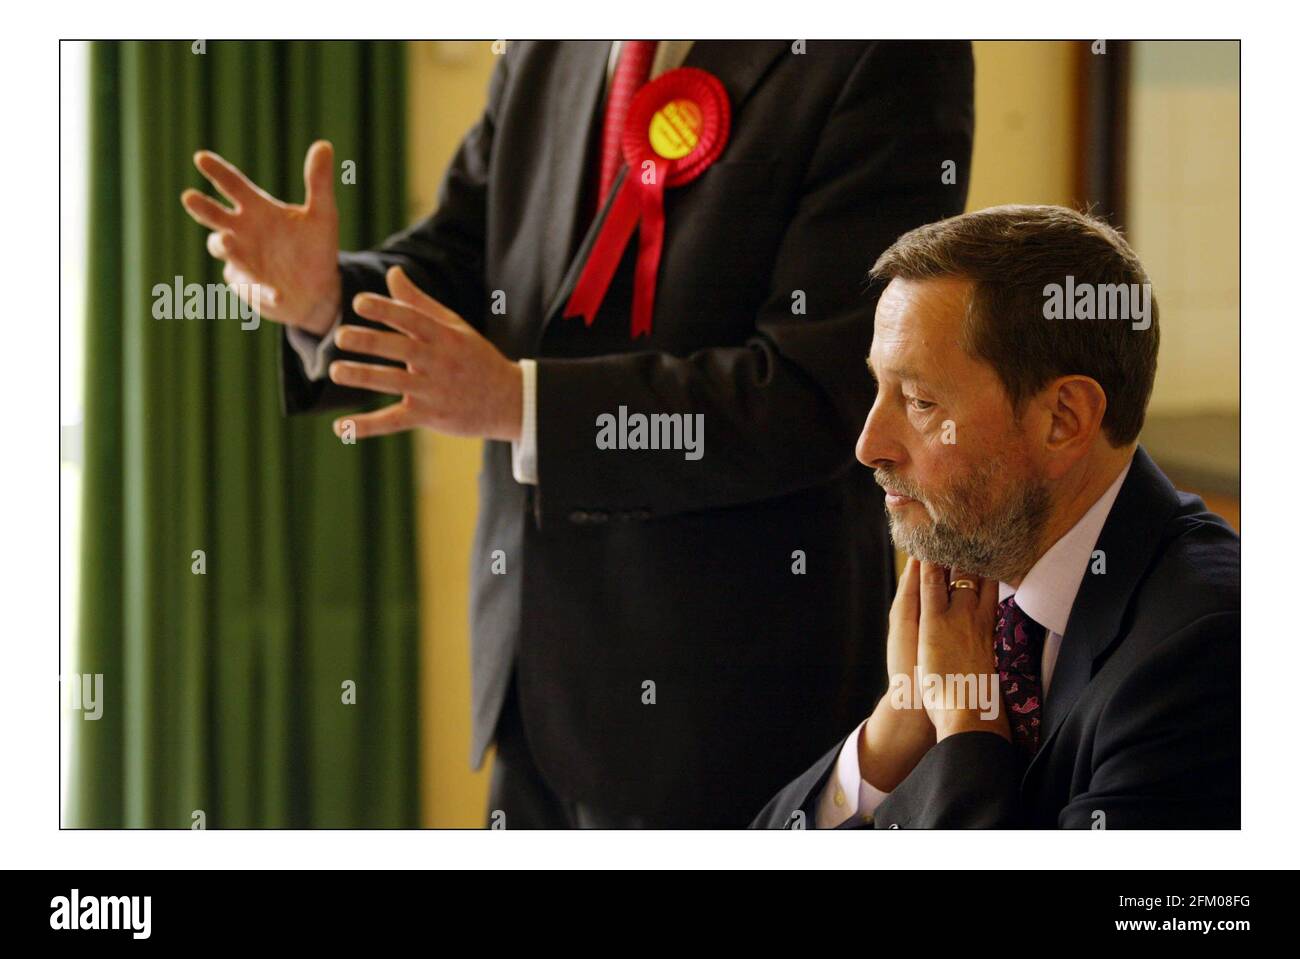 David Blunkett acompanied by Geraint Davies Labour candidate for Croydon central, speak to local residents of New Abbington as part of the labour election campaign.pic David Sandison 26/4/2005 Stock Photo